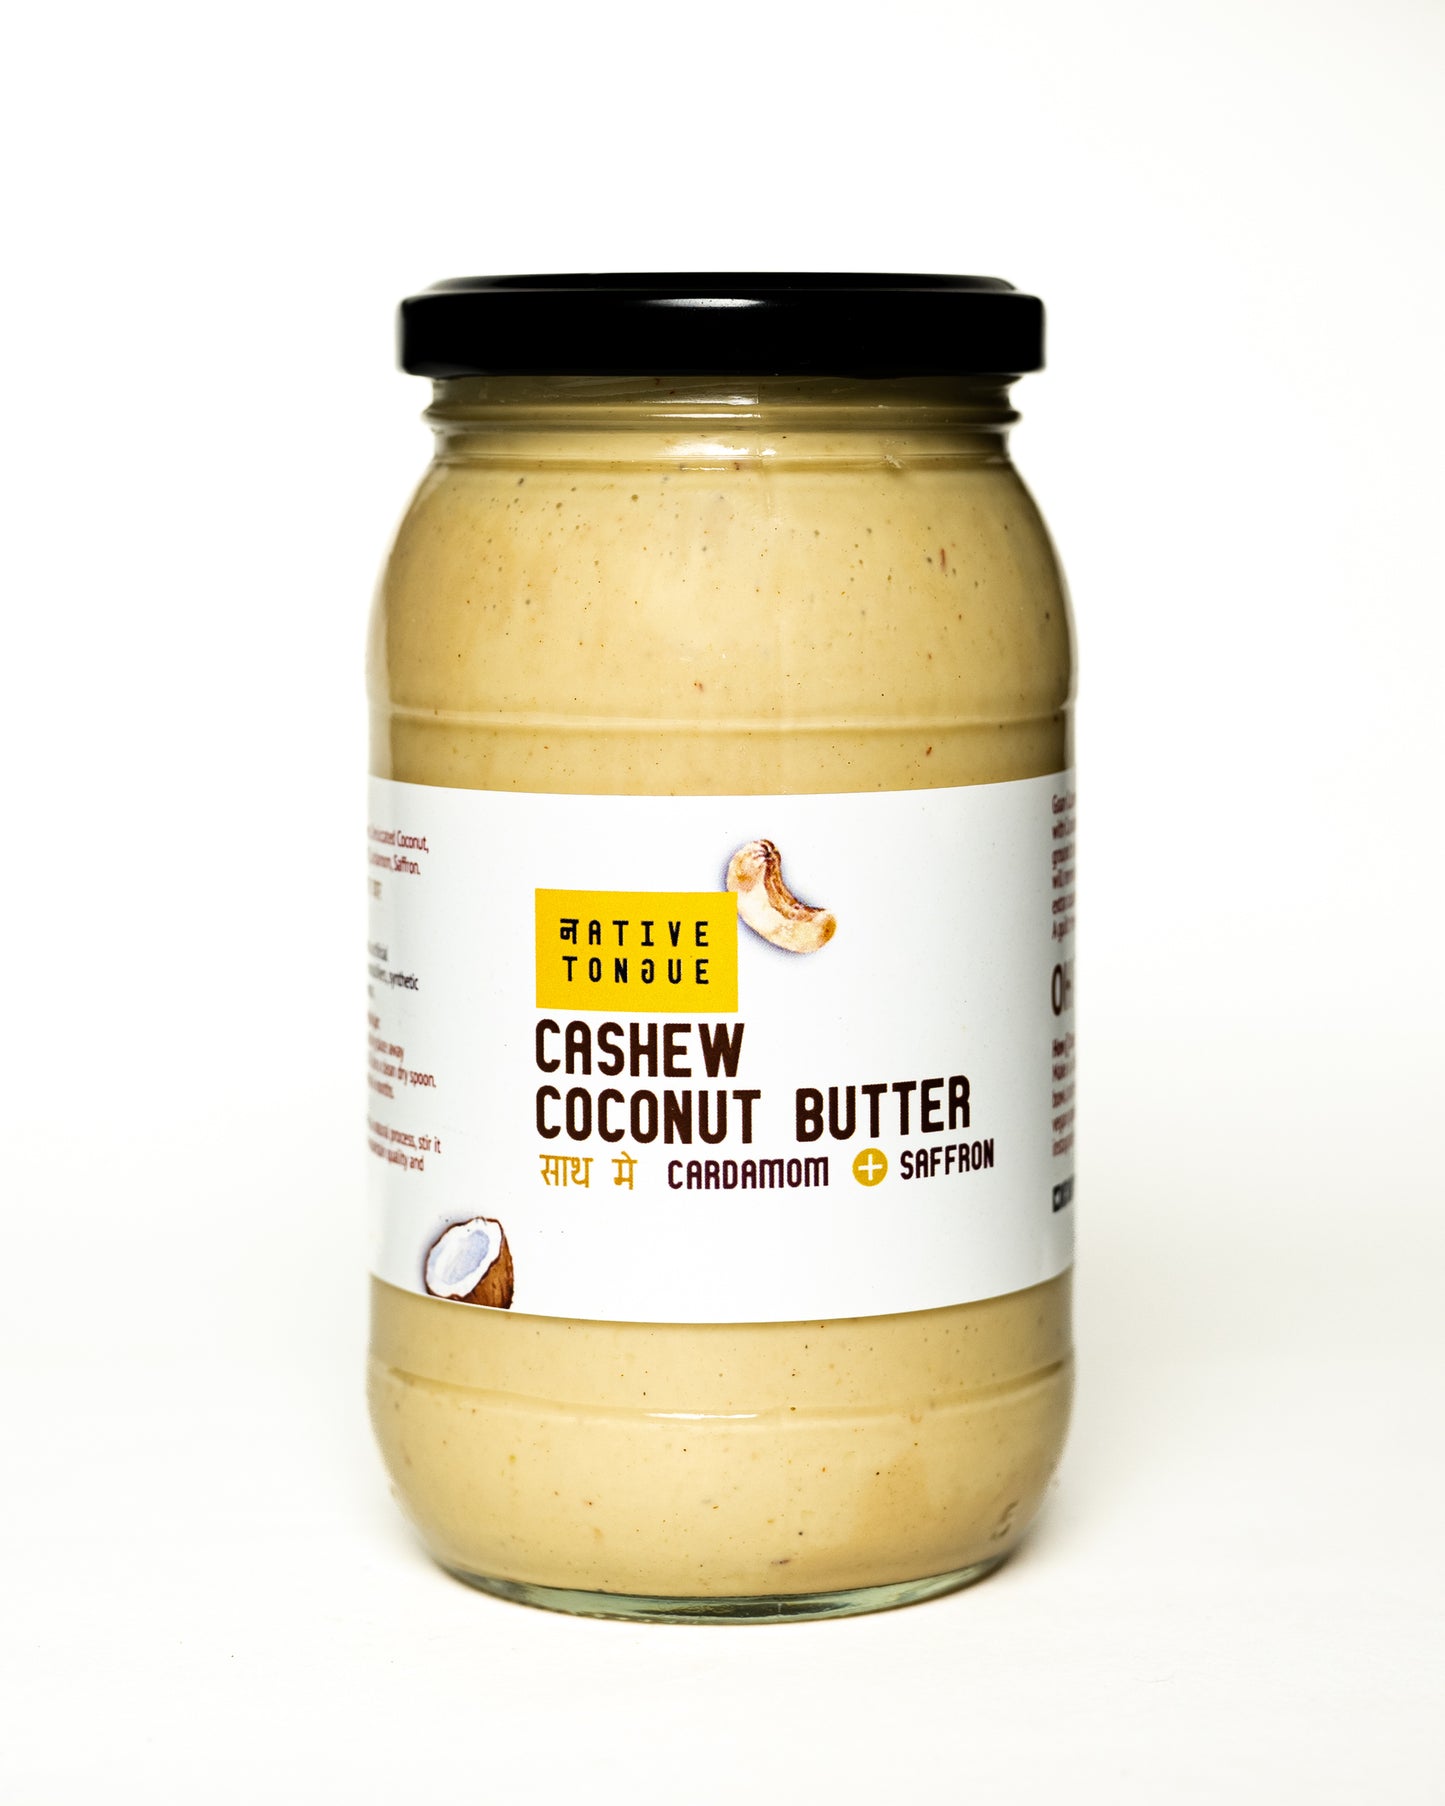 Cashew Coconut Butter With Cardamom And Saffron